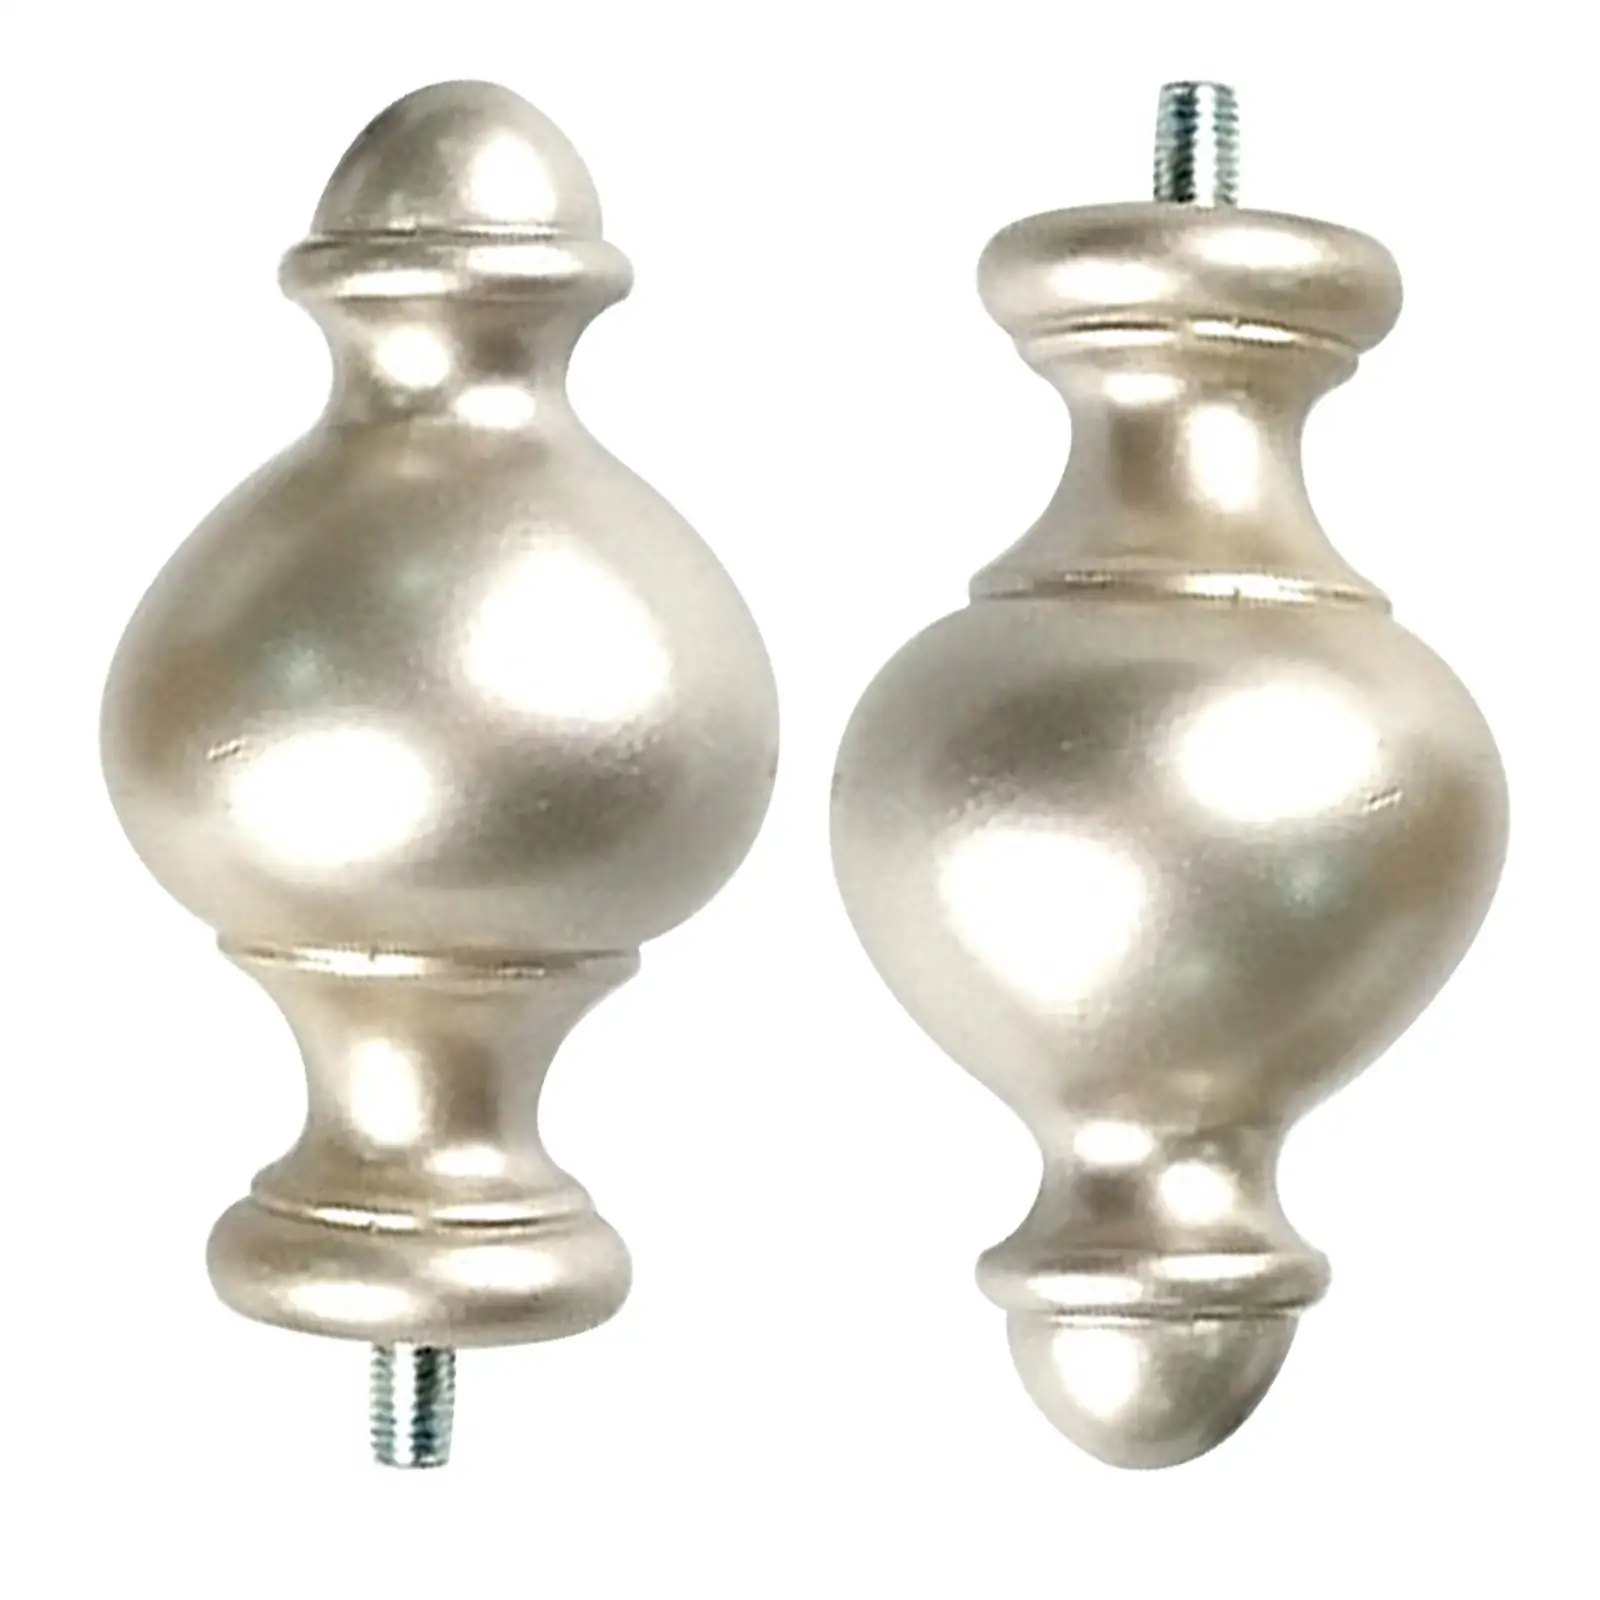 2 Pieces Curtain Rod Finials 9/16 Inch Diameter Replacement for Living Room